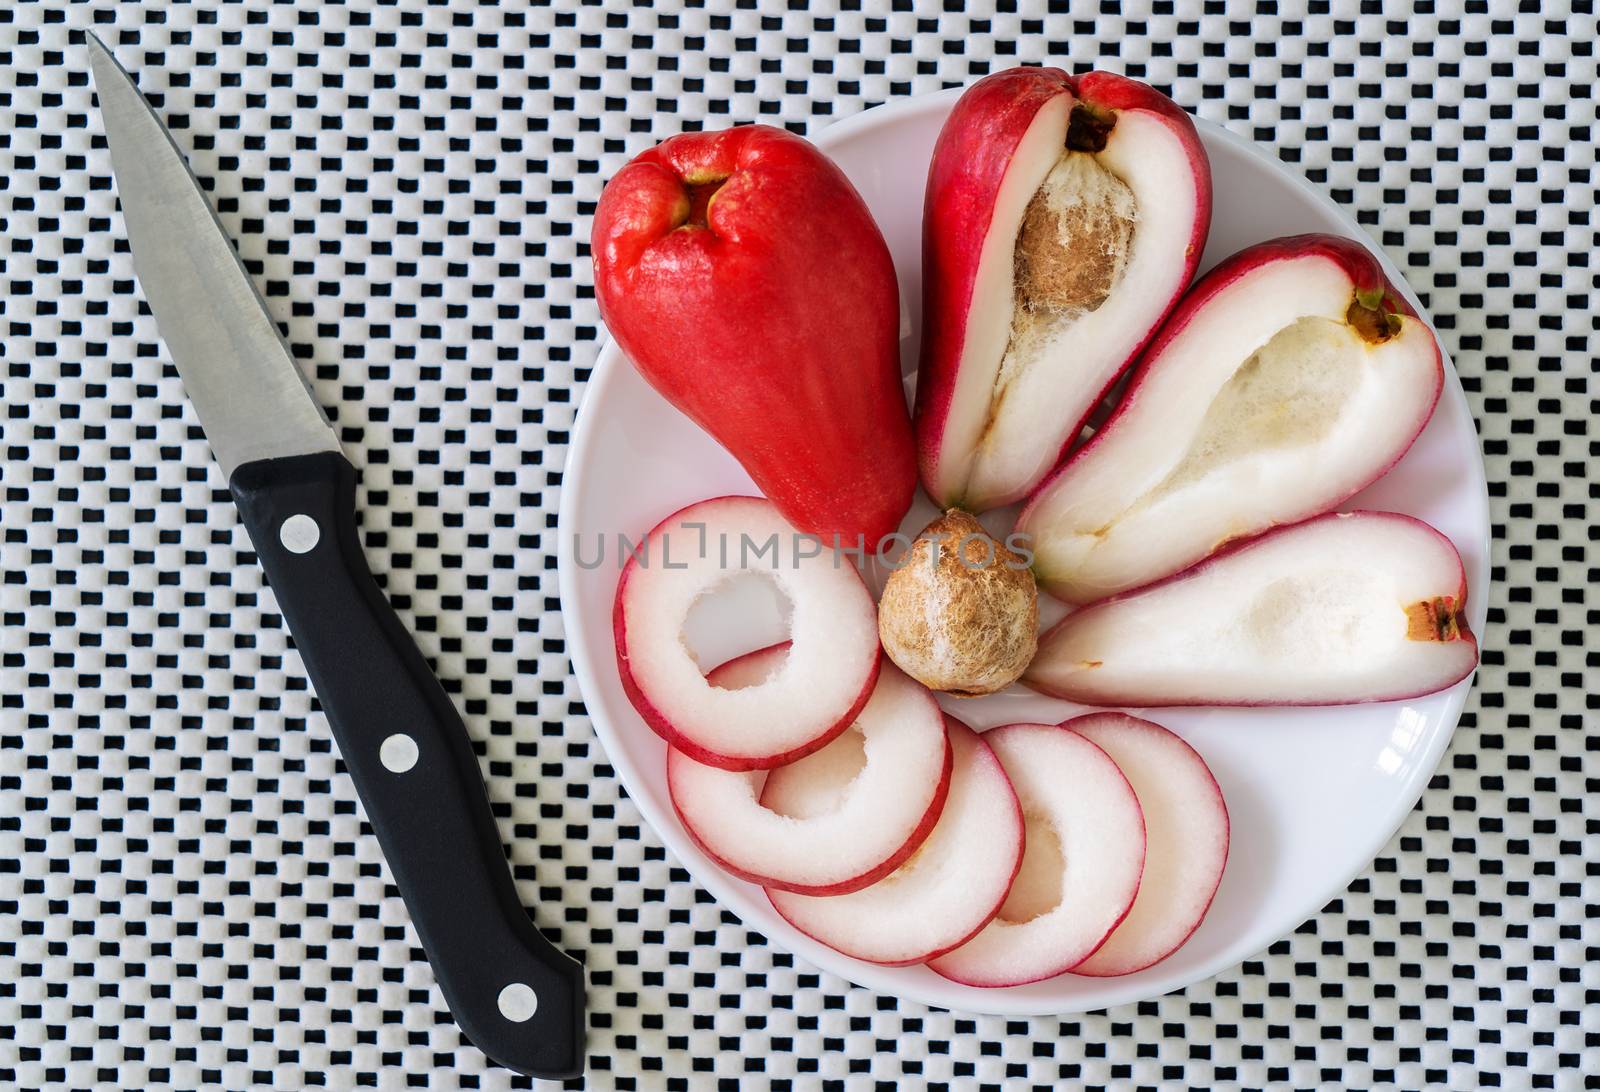 pieces of rose fruit in a plate on a white surface and a knife aside